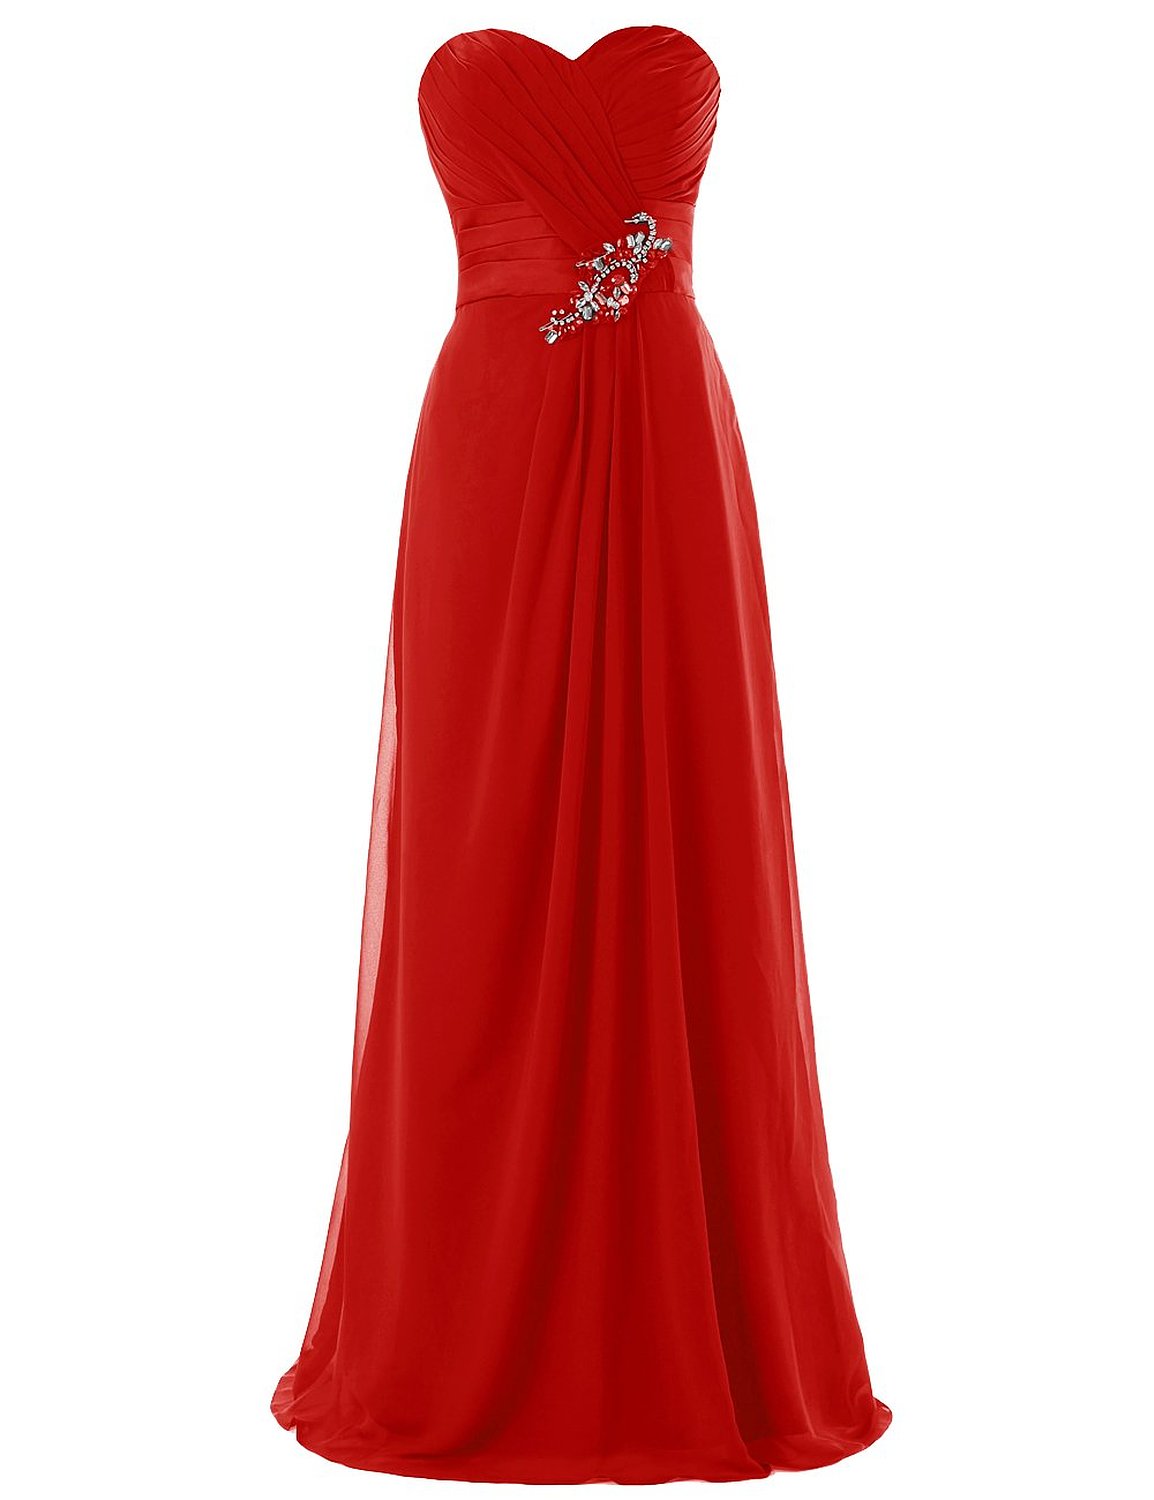 Long Chiffon Prom Dresses With Beadings Bridesmaid Dresses Party Dress